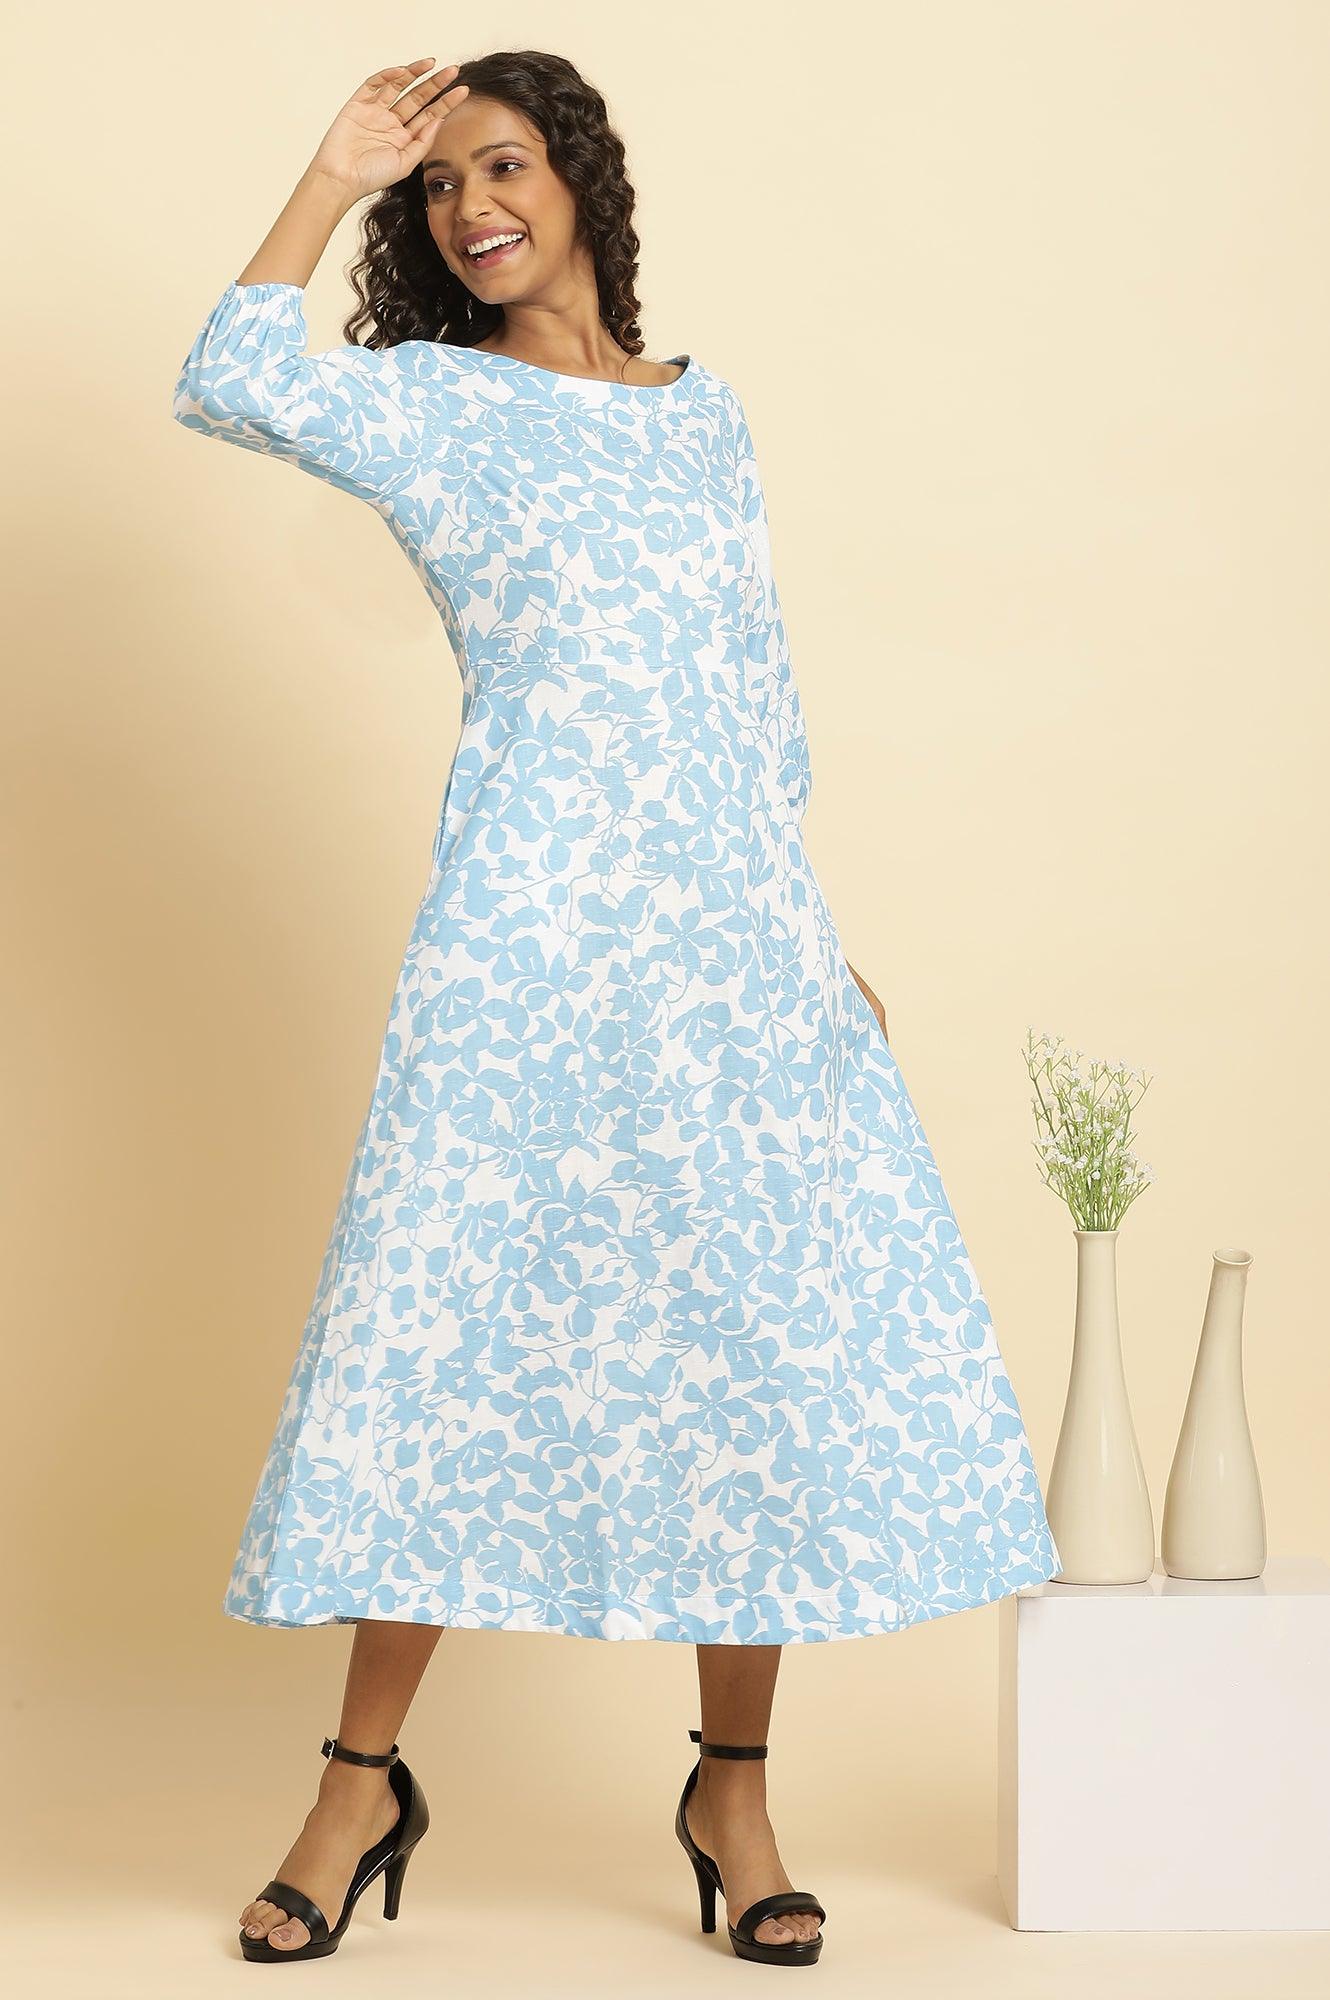 White And Blue Floral Printed Flared Long Dress - wforwoman